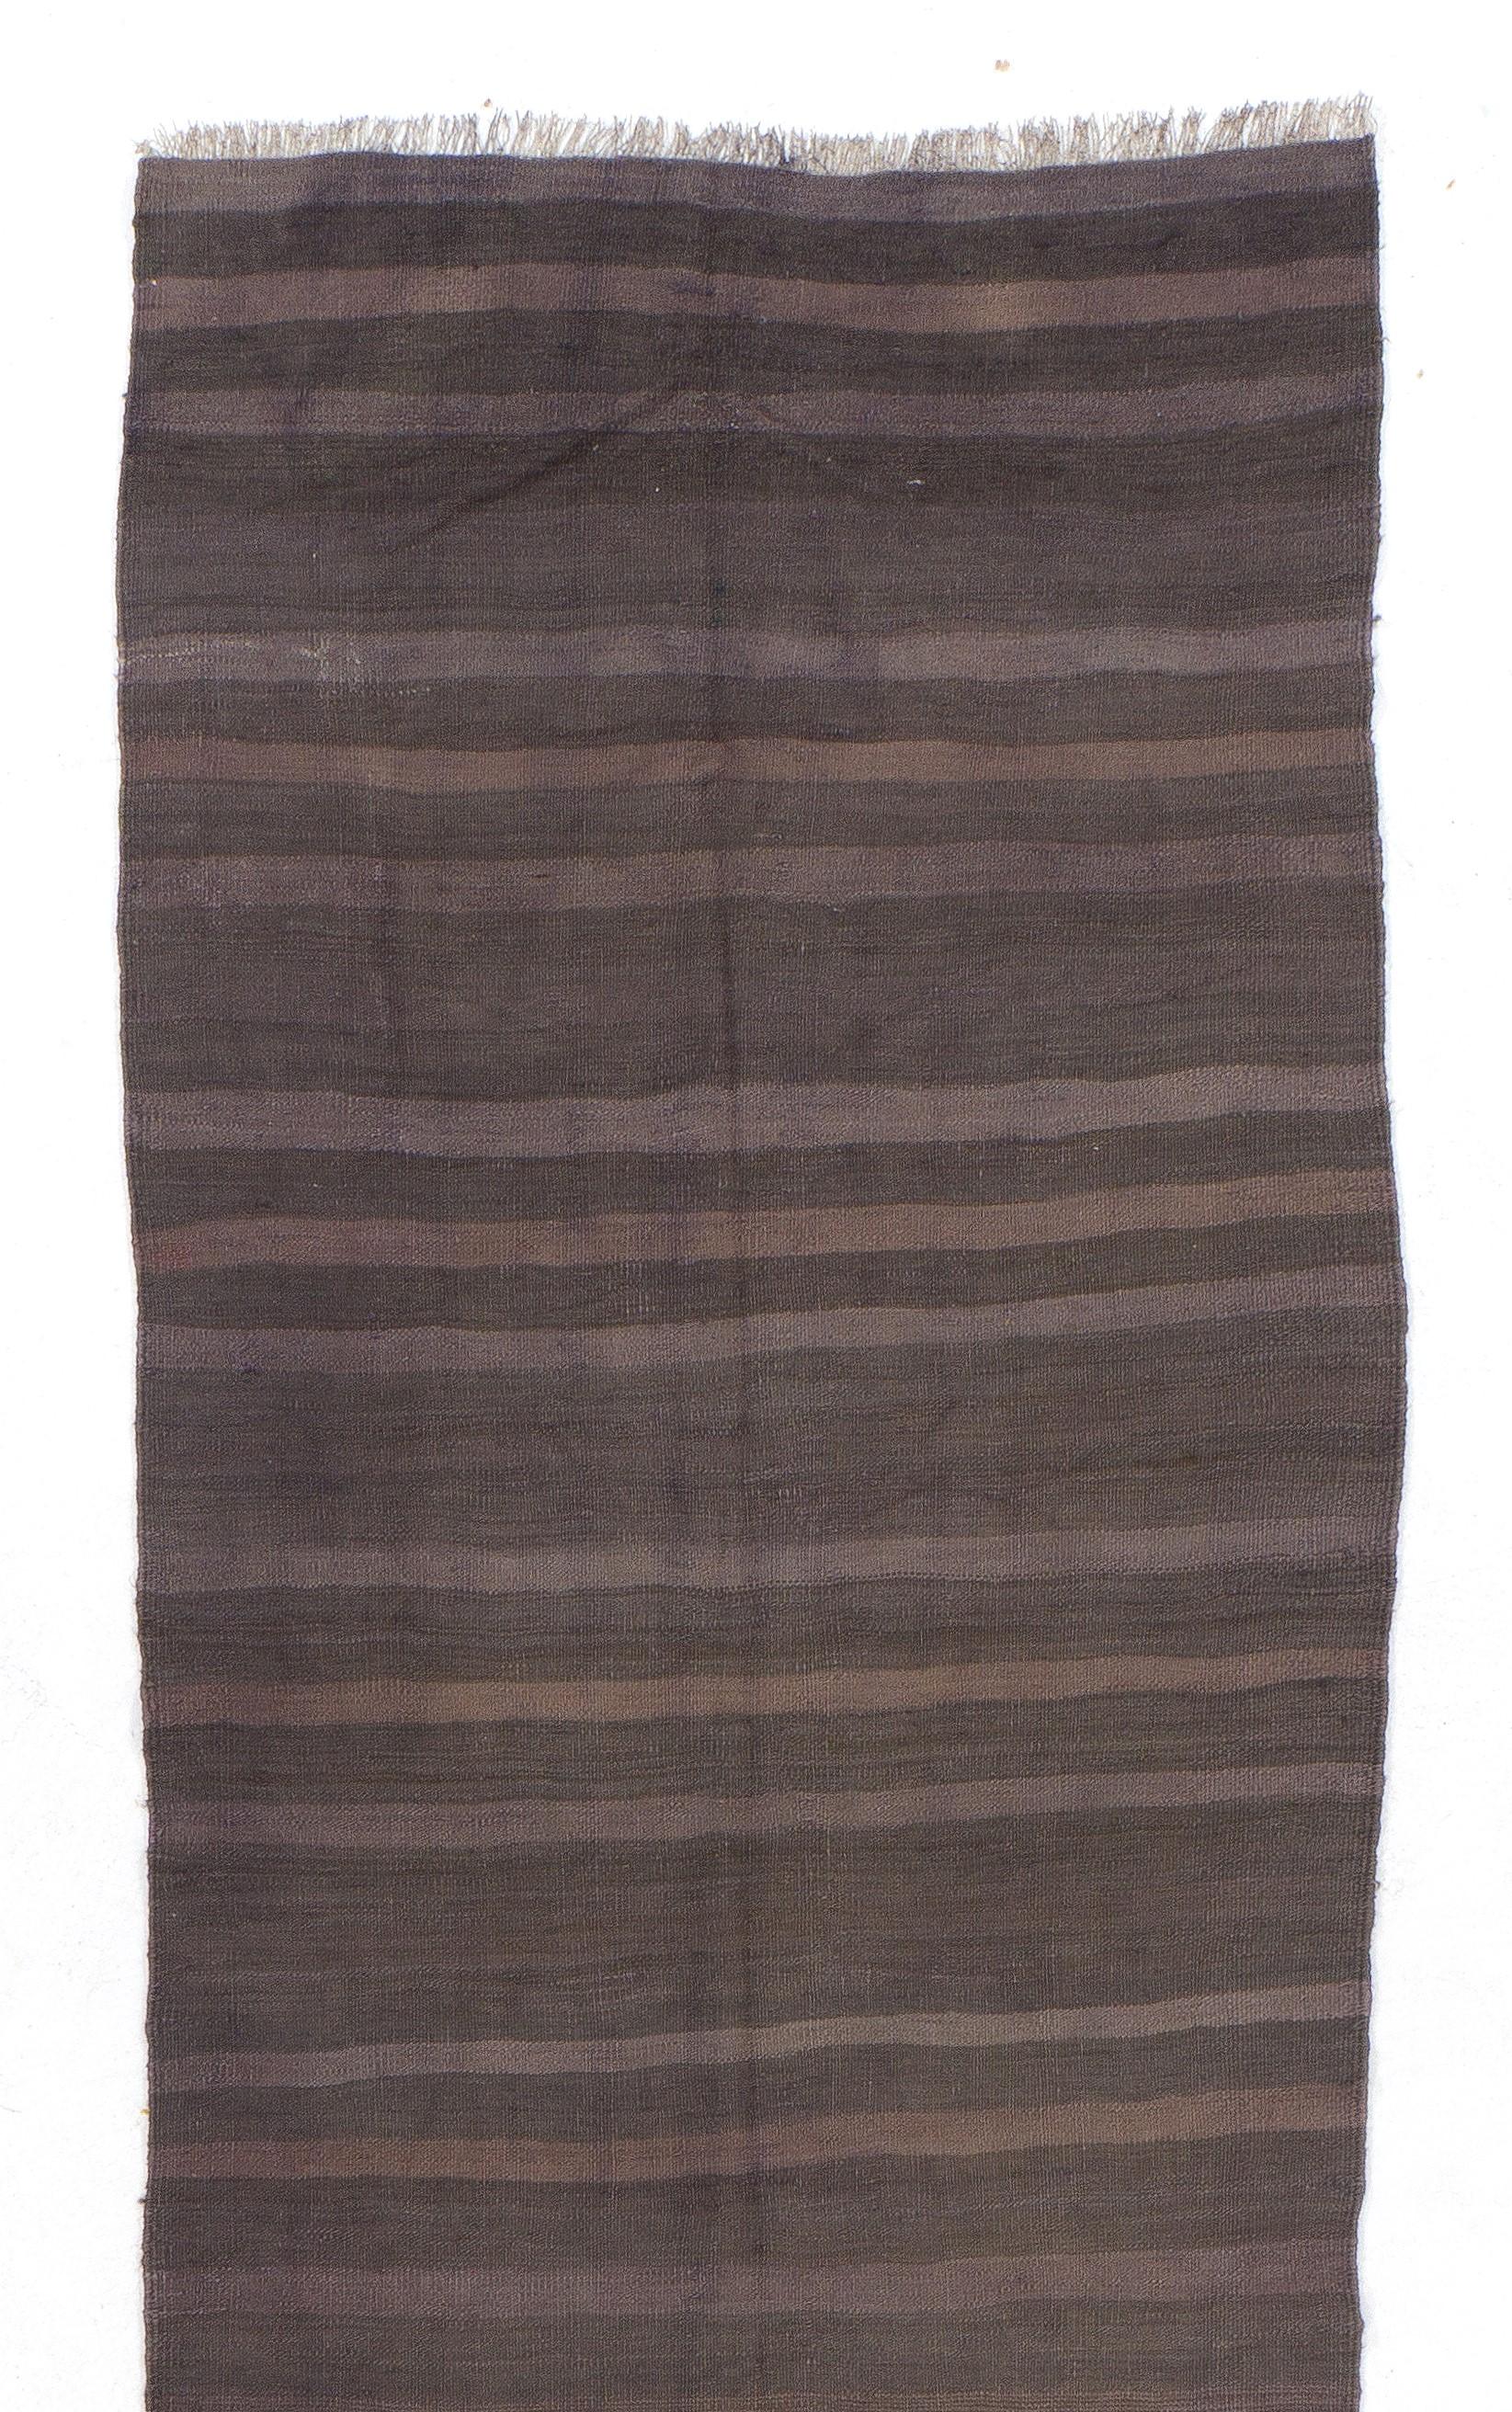 A vintage striped flat-woven handmade kilim runner rug from Turkey, made of un-dyed organic sheep's wool in shades of taupe and brown. 

It is in good condition with no issues, lightweight, reversible and professionally washed. We can also supply a